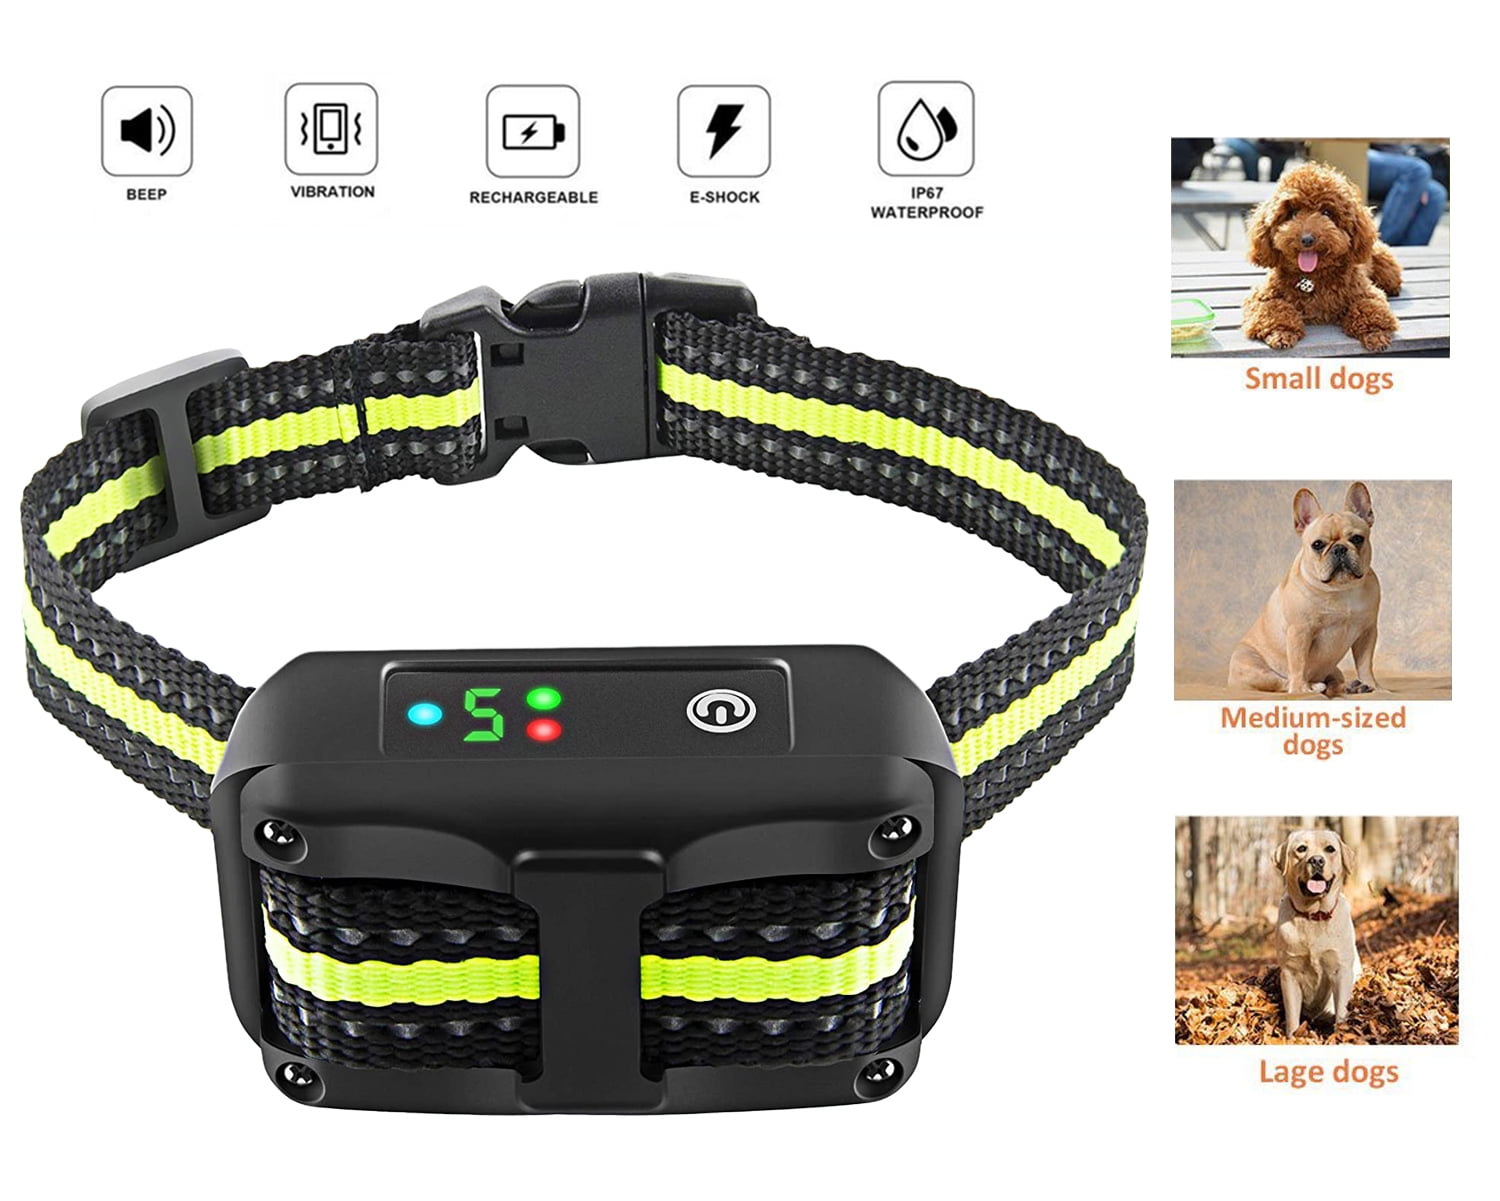 Rechargeable Anti Shock Barking Collar Dog Bark Collar Upgraded Smart Detection Module Stop Barking with Beep/Vibration/Shock 5 Sensitivity & IPX67 Level Waterproof for Small Medium Large Dogs 